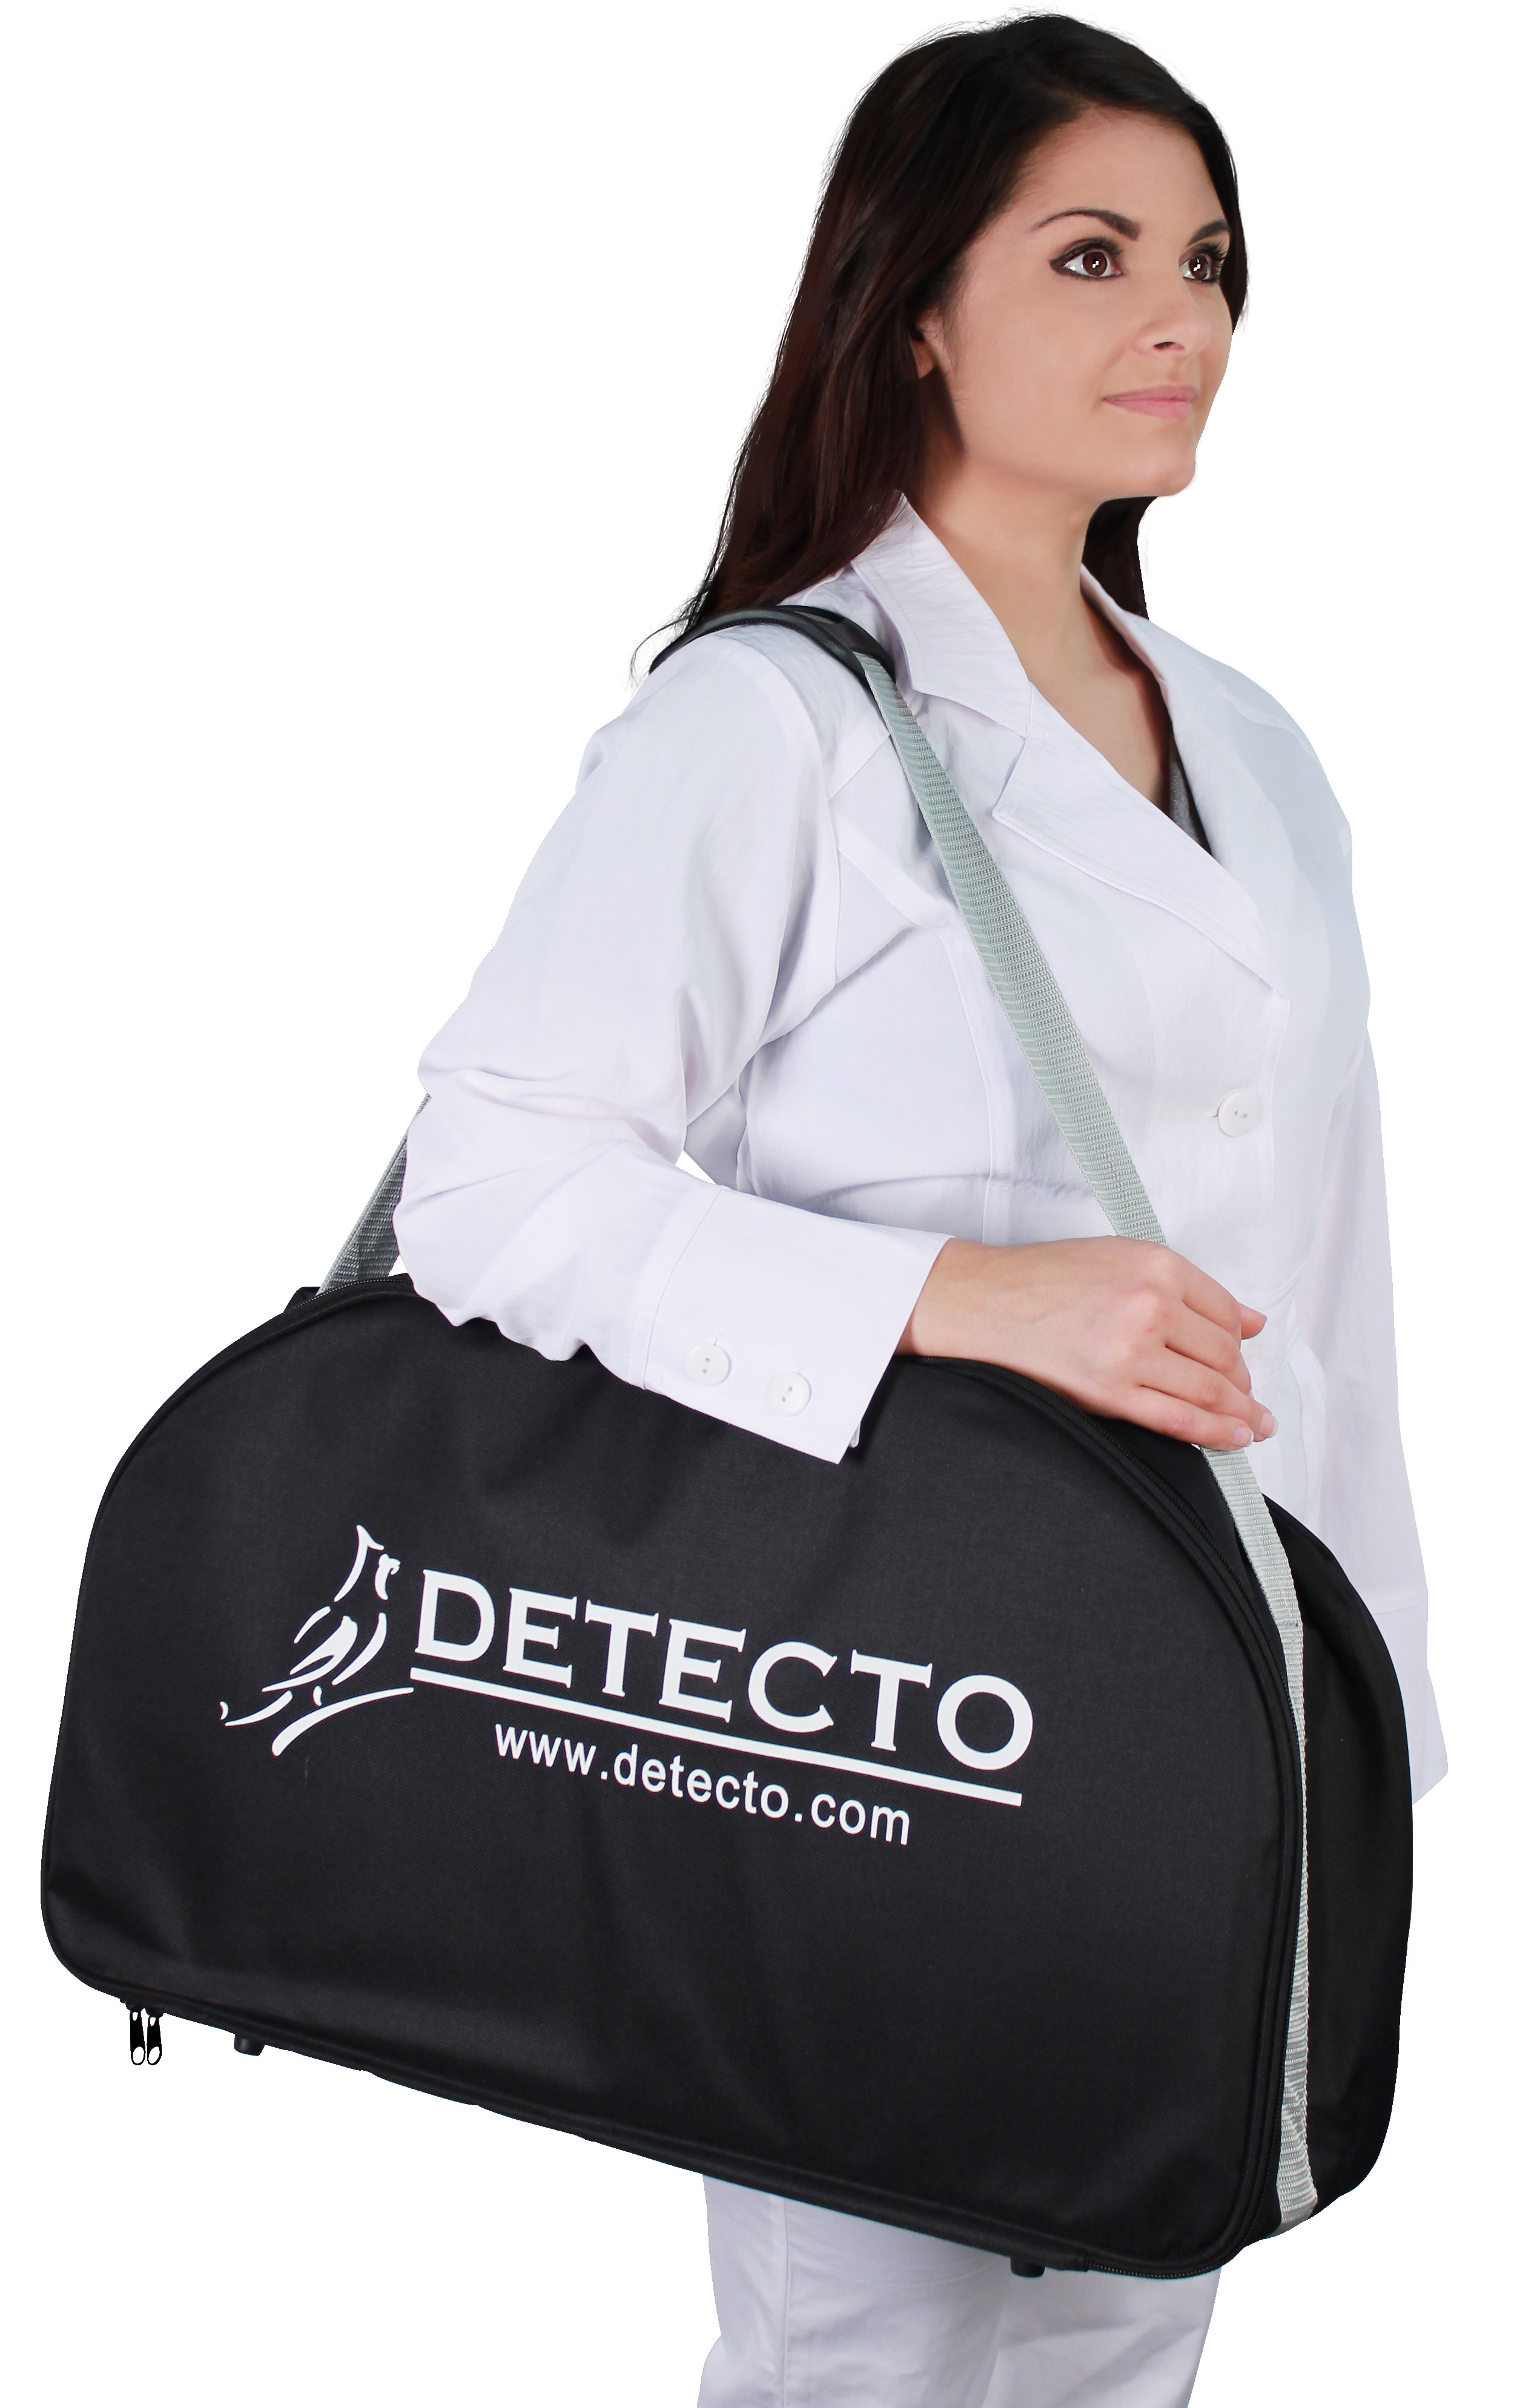 Detecto MB130 Baby Scale